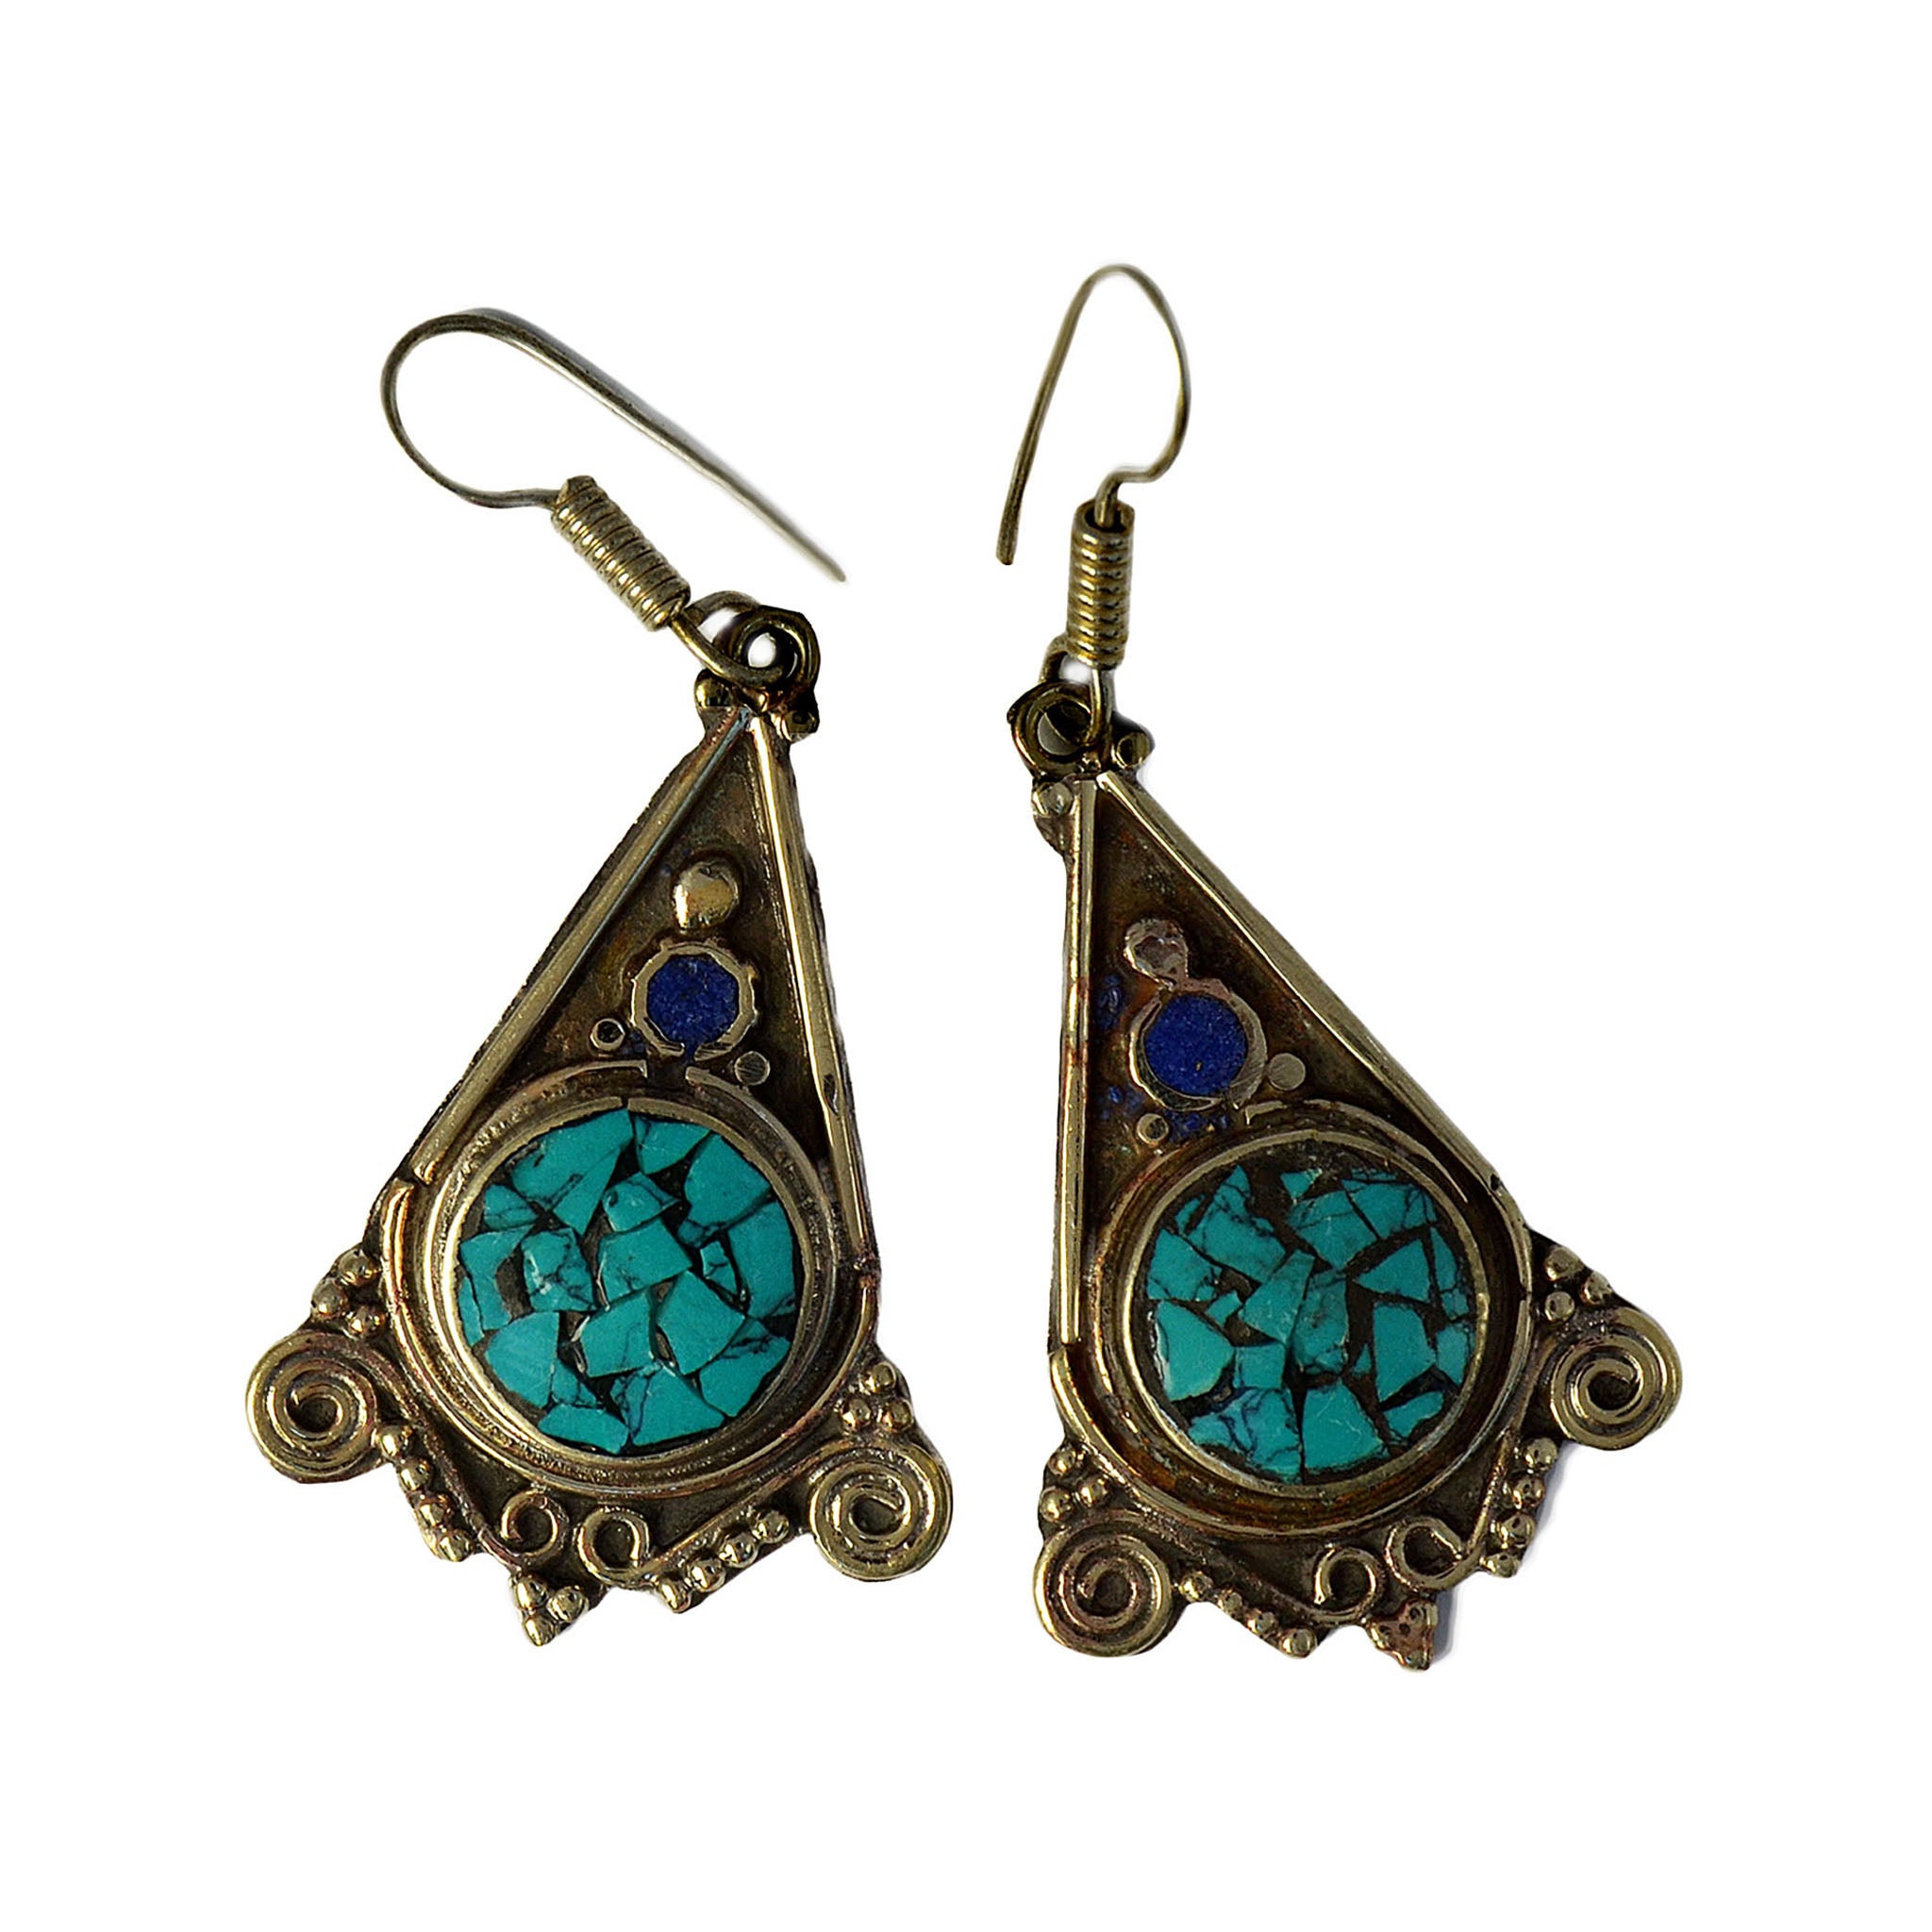 Tibetan silver drop earrings with inlay turquoise and lapis lazuli stones